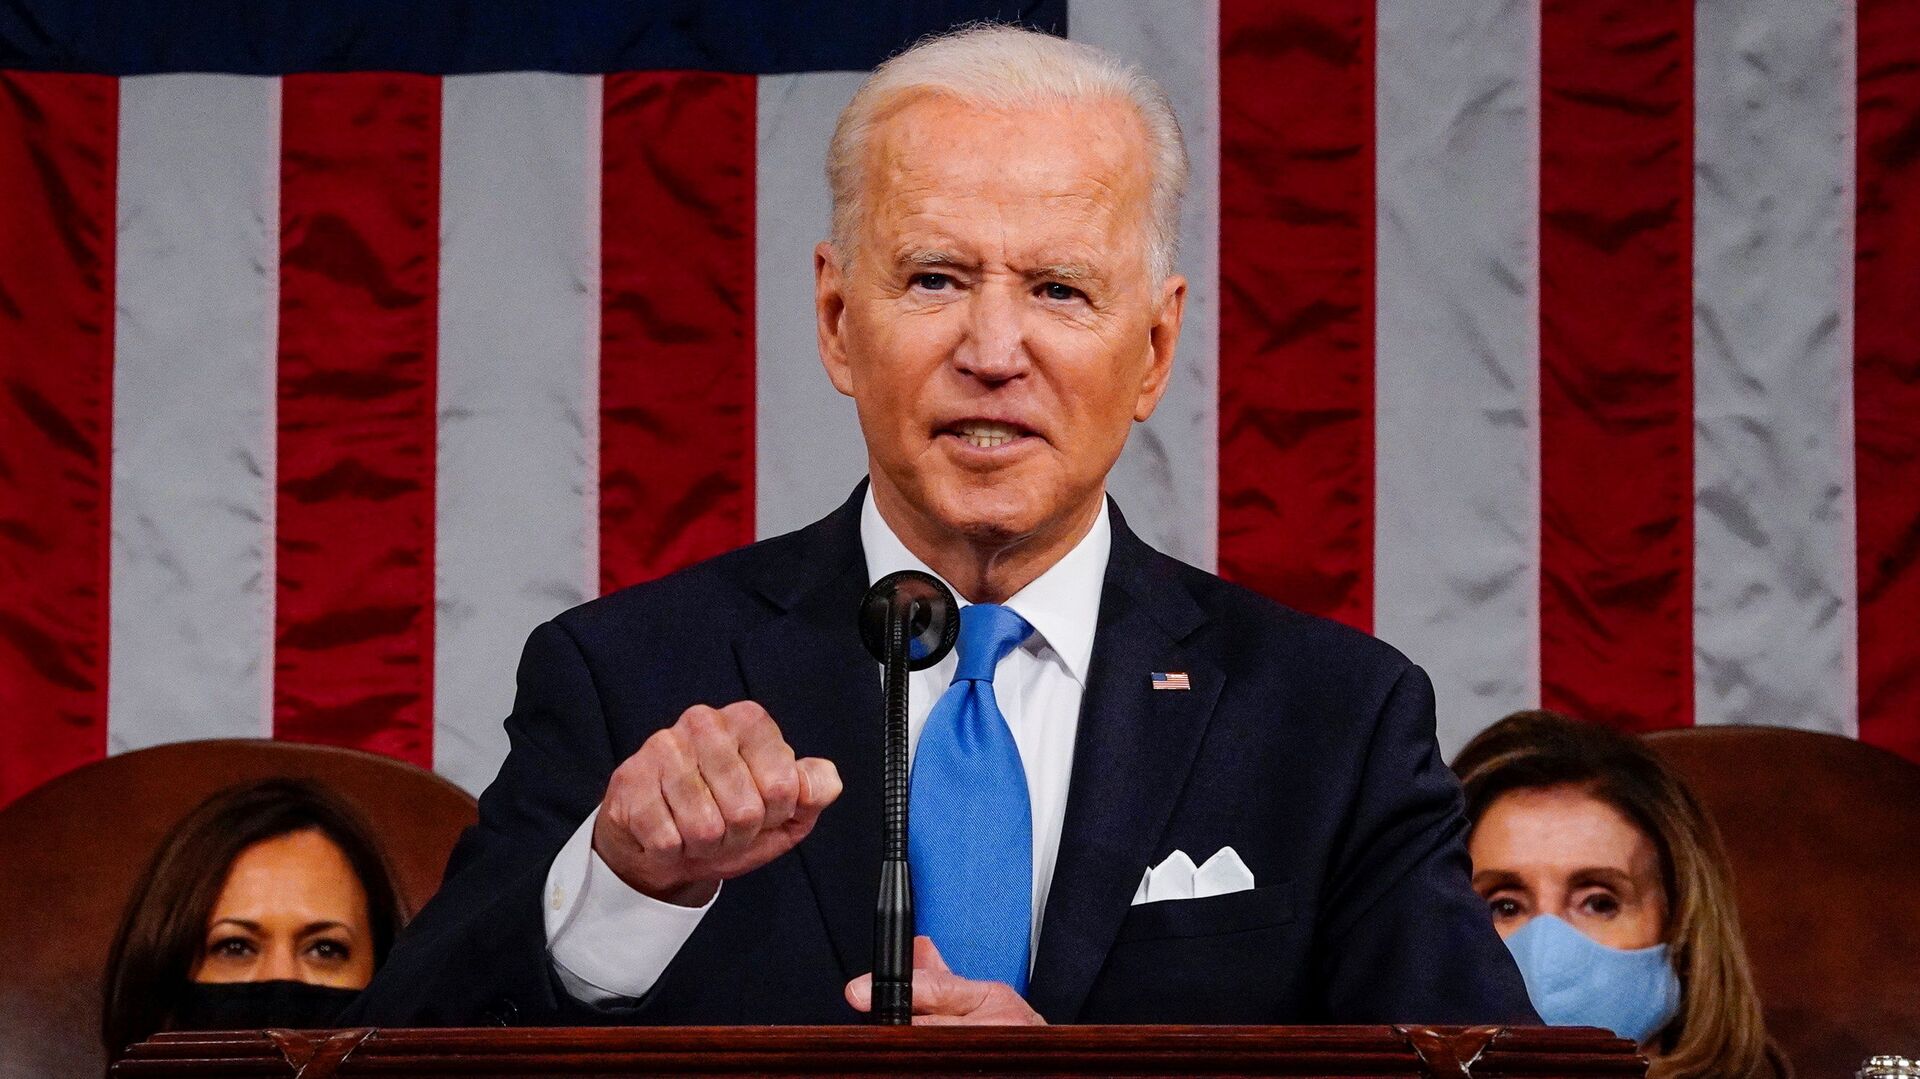 US President Joe Biden addresses a joint session of Congress in the House chamber of the US Capitol in Washington, DC, 28 April 2021 - Sputnik International, 1920, 29.04.2021